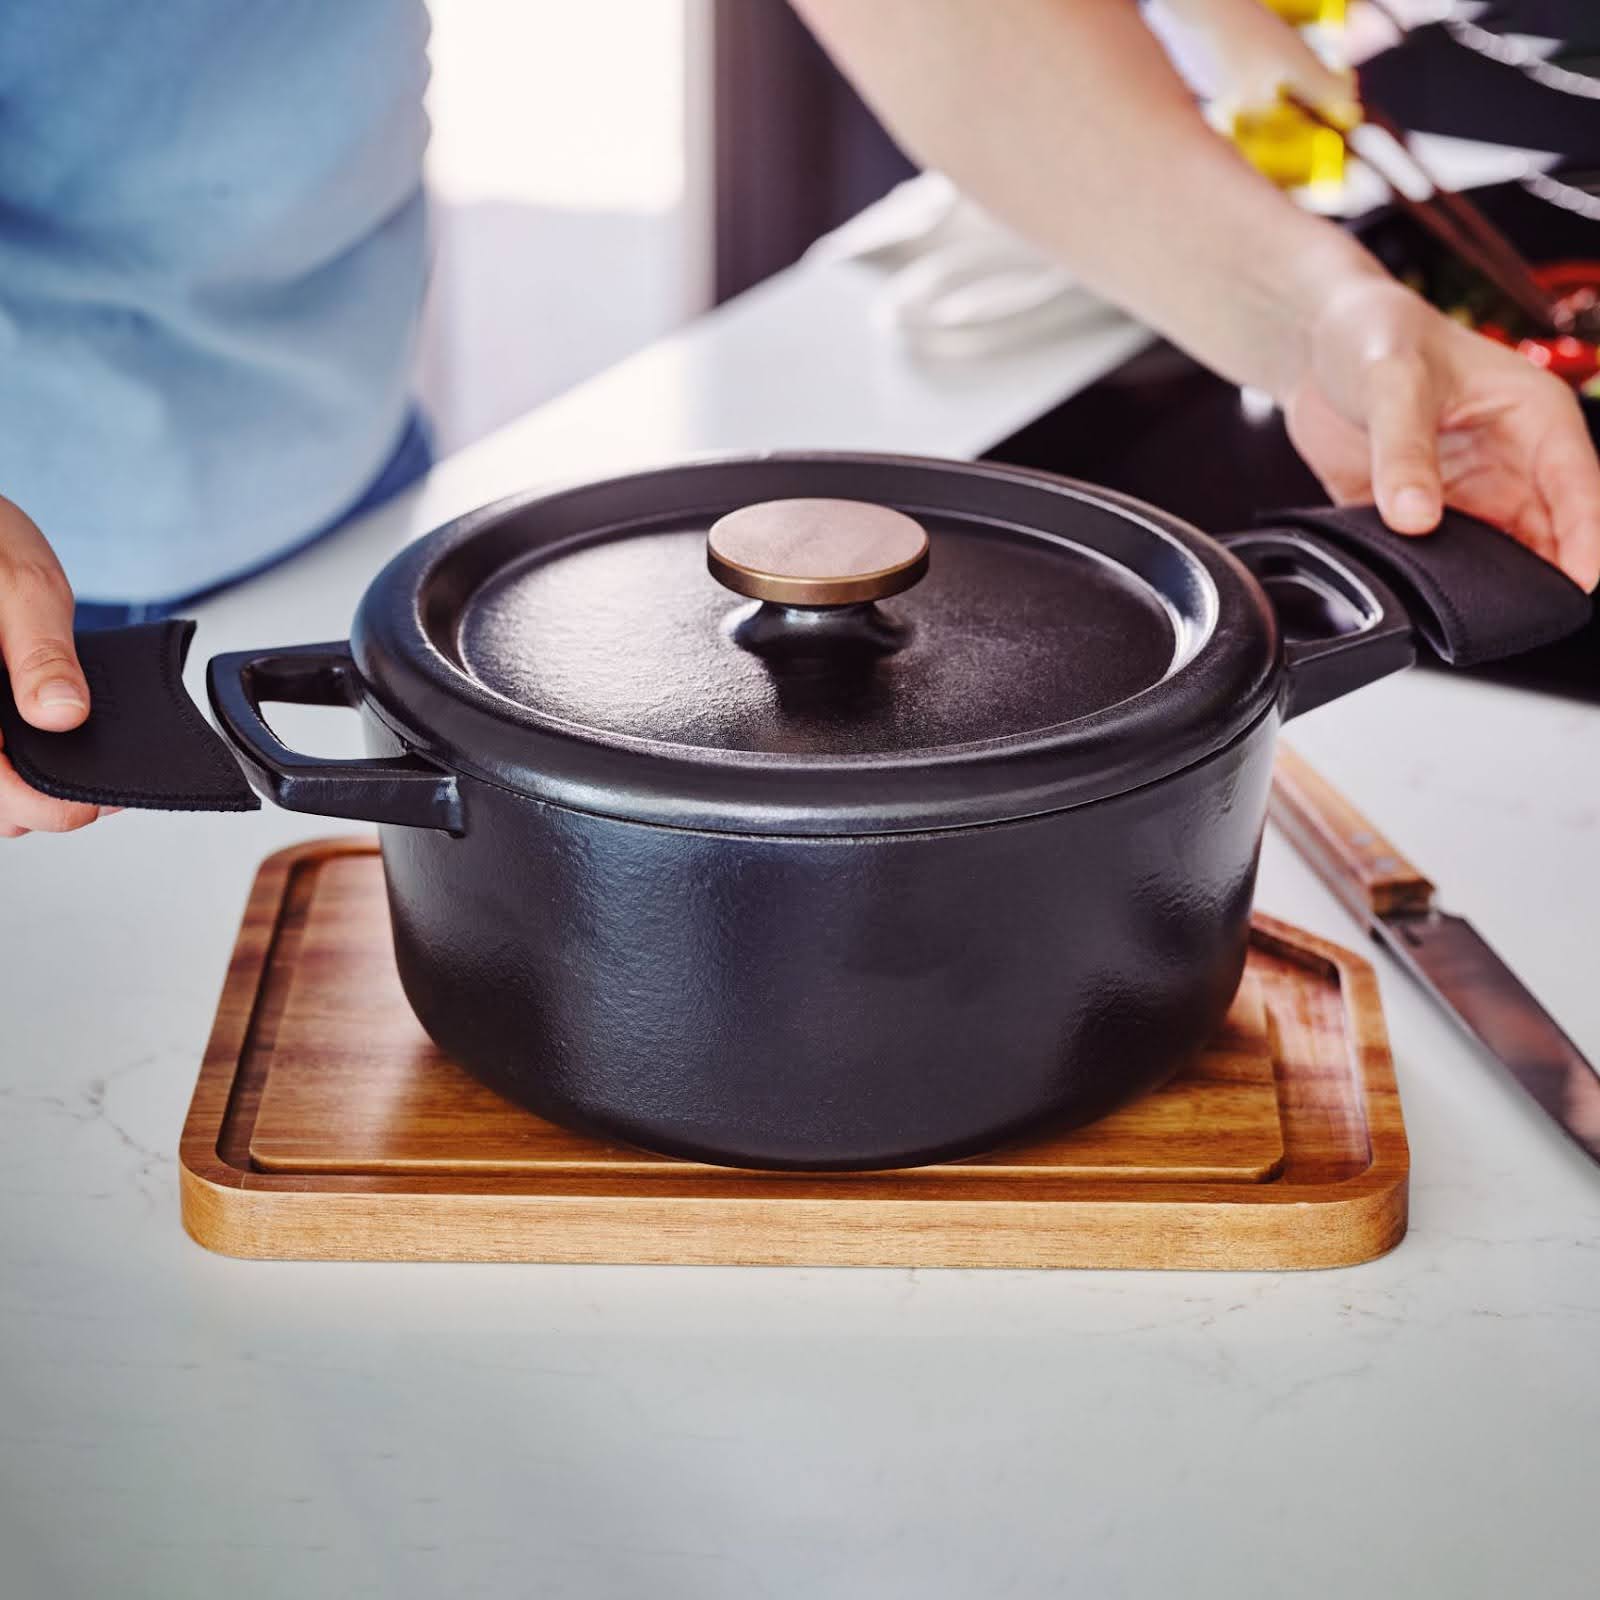 Person putting pot handle covers over a cast iron pot